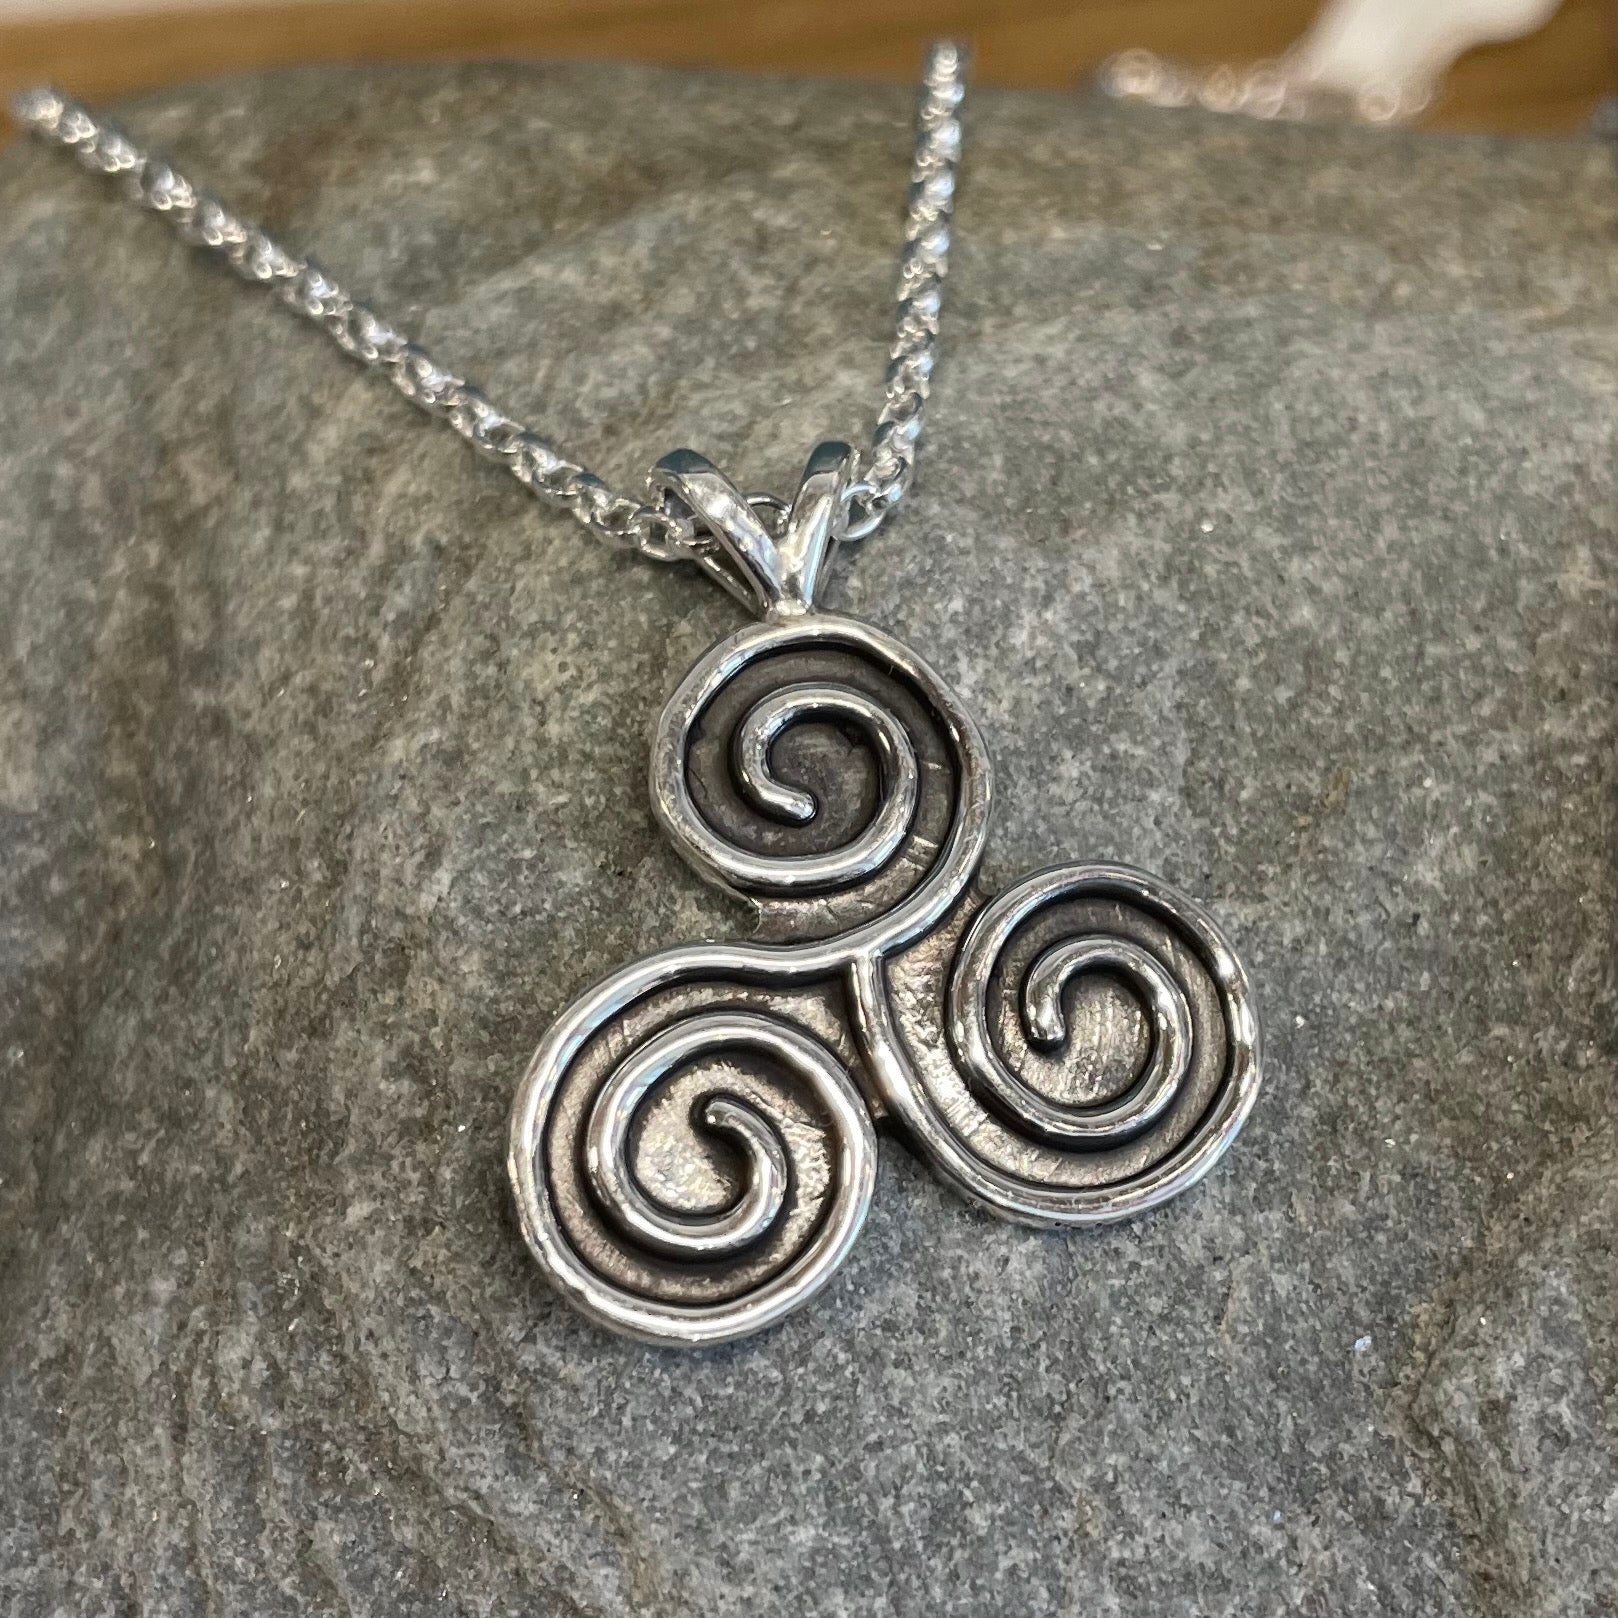 This stunning Celtic - Triskel Oxidised Silver Pendant measures 21 mm wide and 24 mm from the top of the bail. Included is a 1.7 mm Sterling Silver Rolo Chain with a round spring clasp for easy wear.